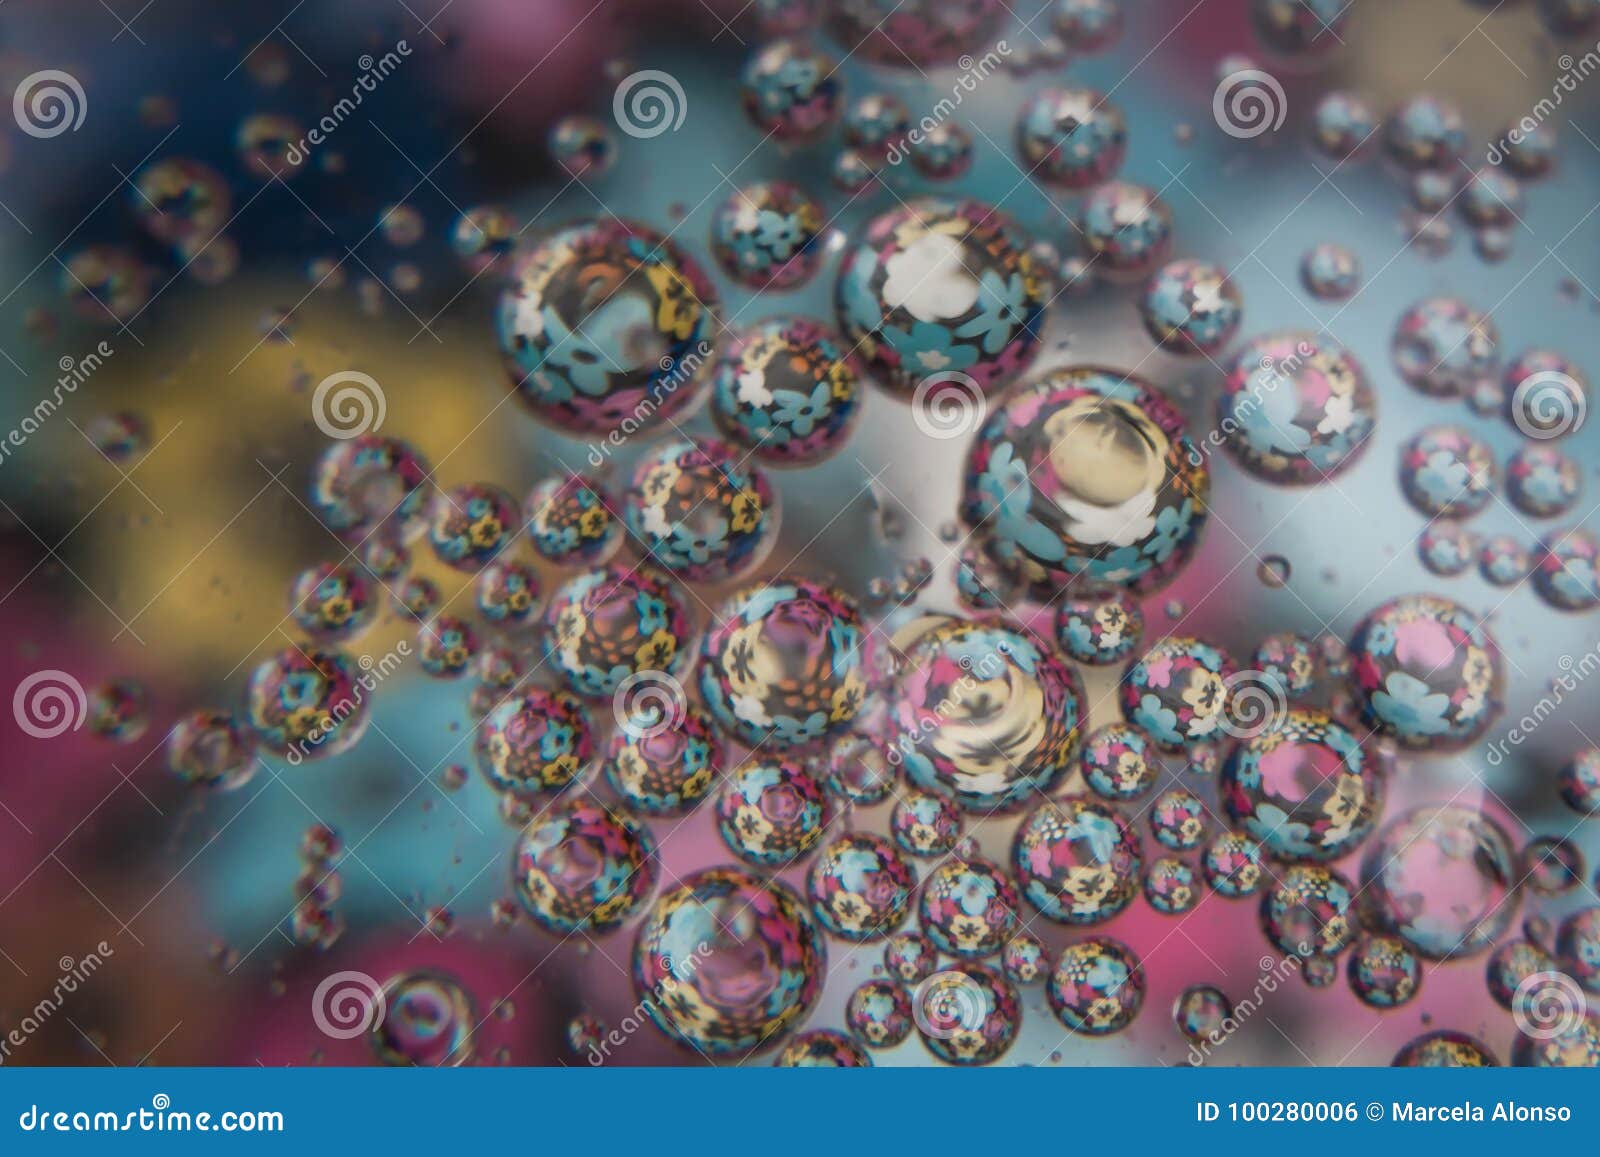 water bubbles with colorful flowers inside